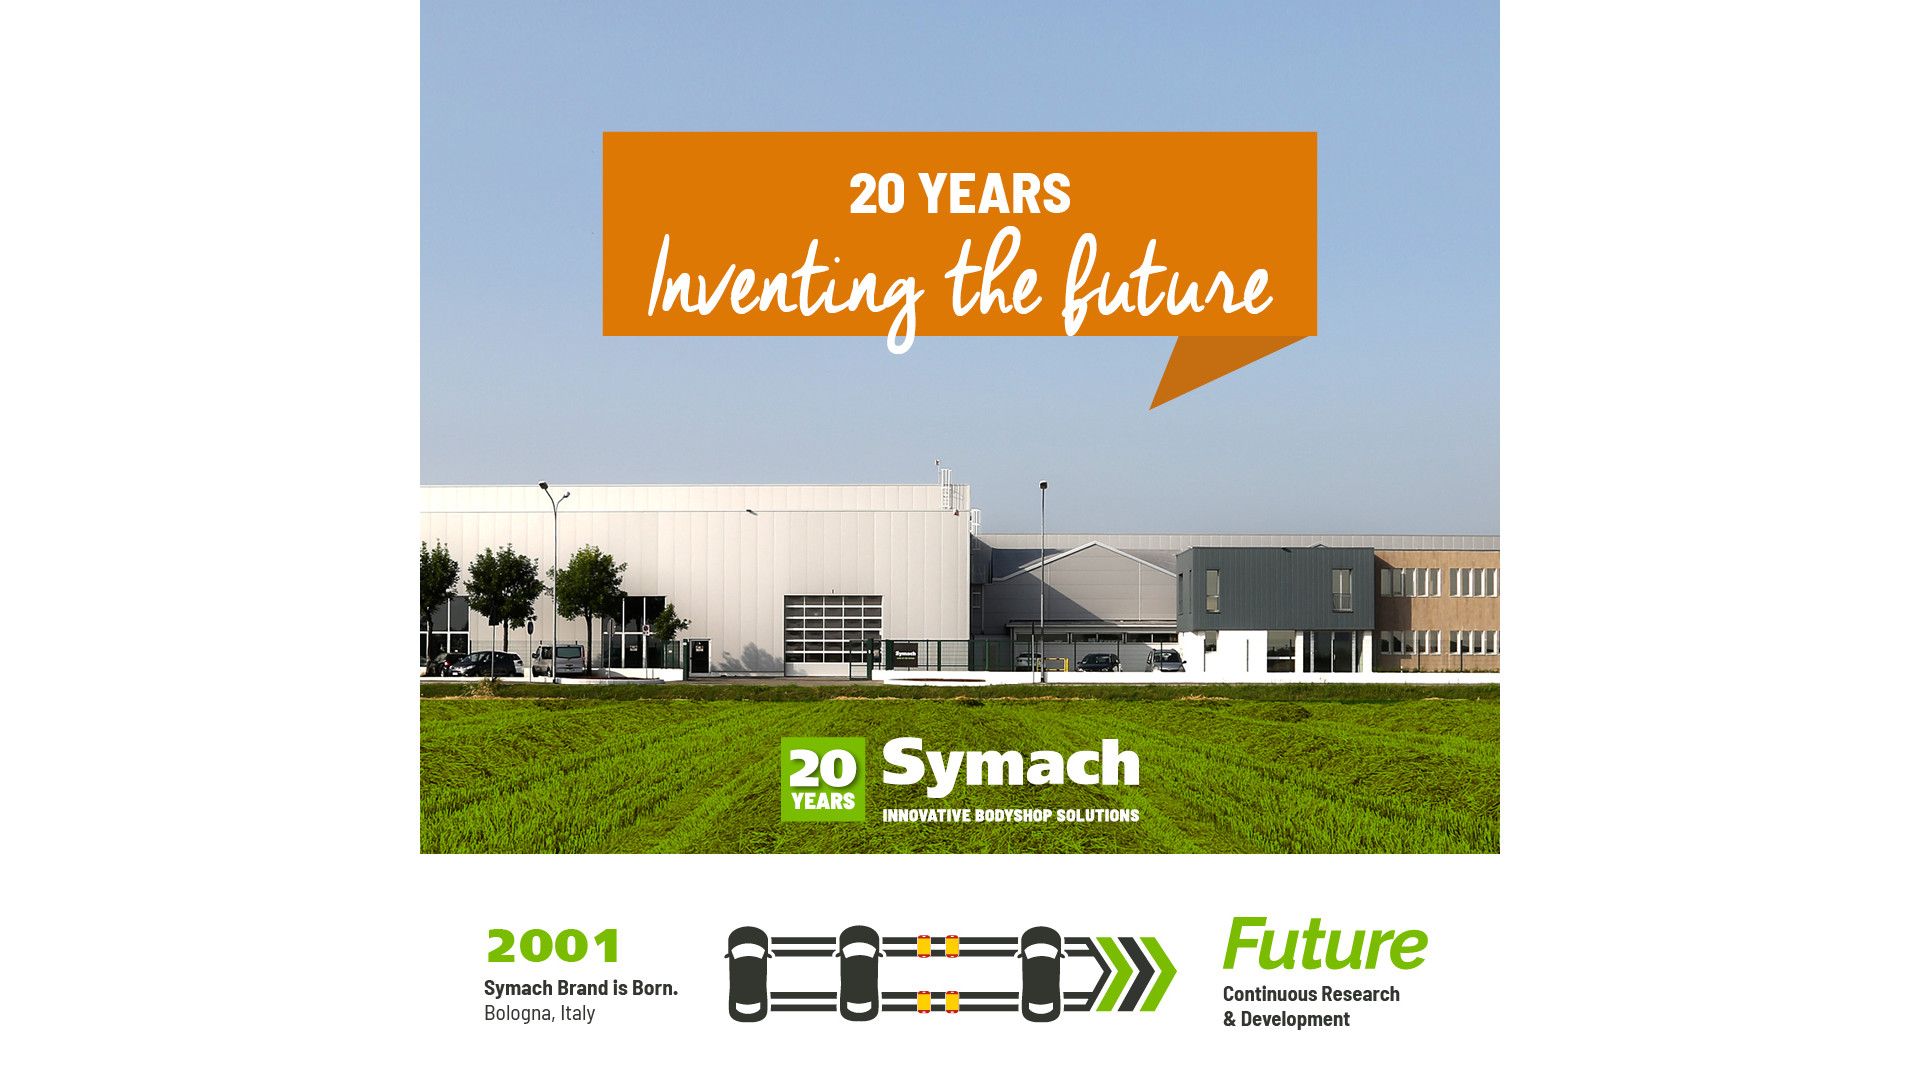 Symach Celebrates 20 Years Of “Inventing The Future”